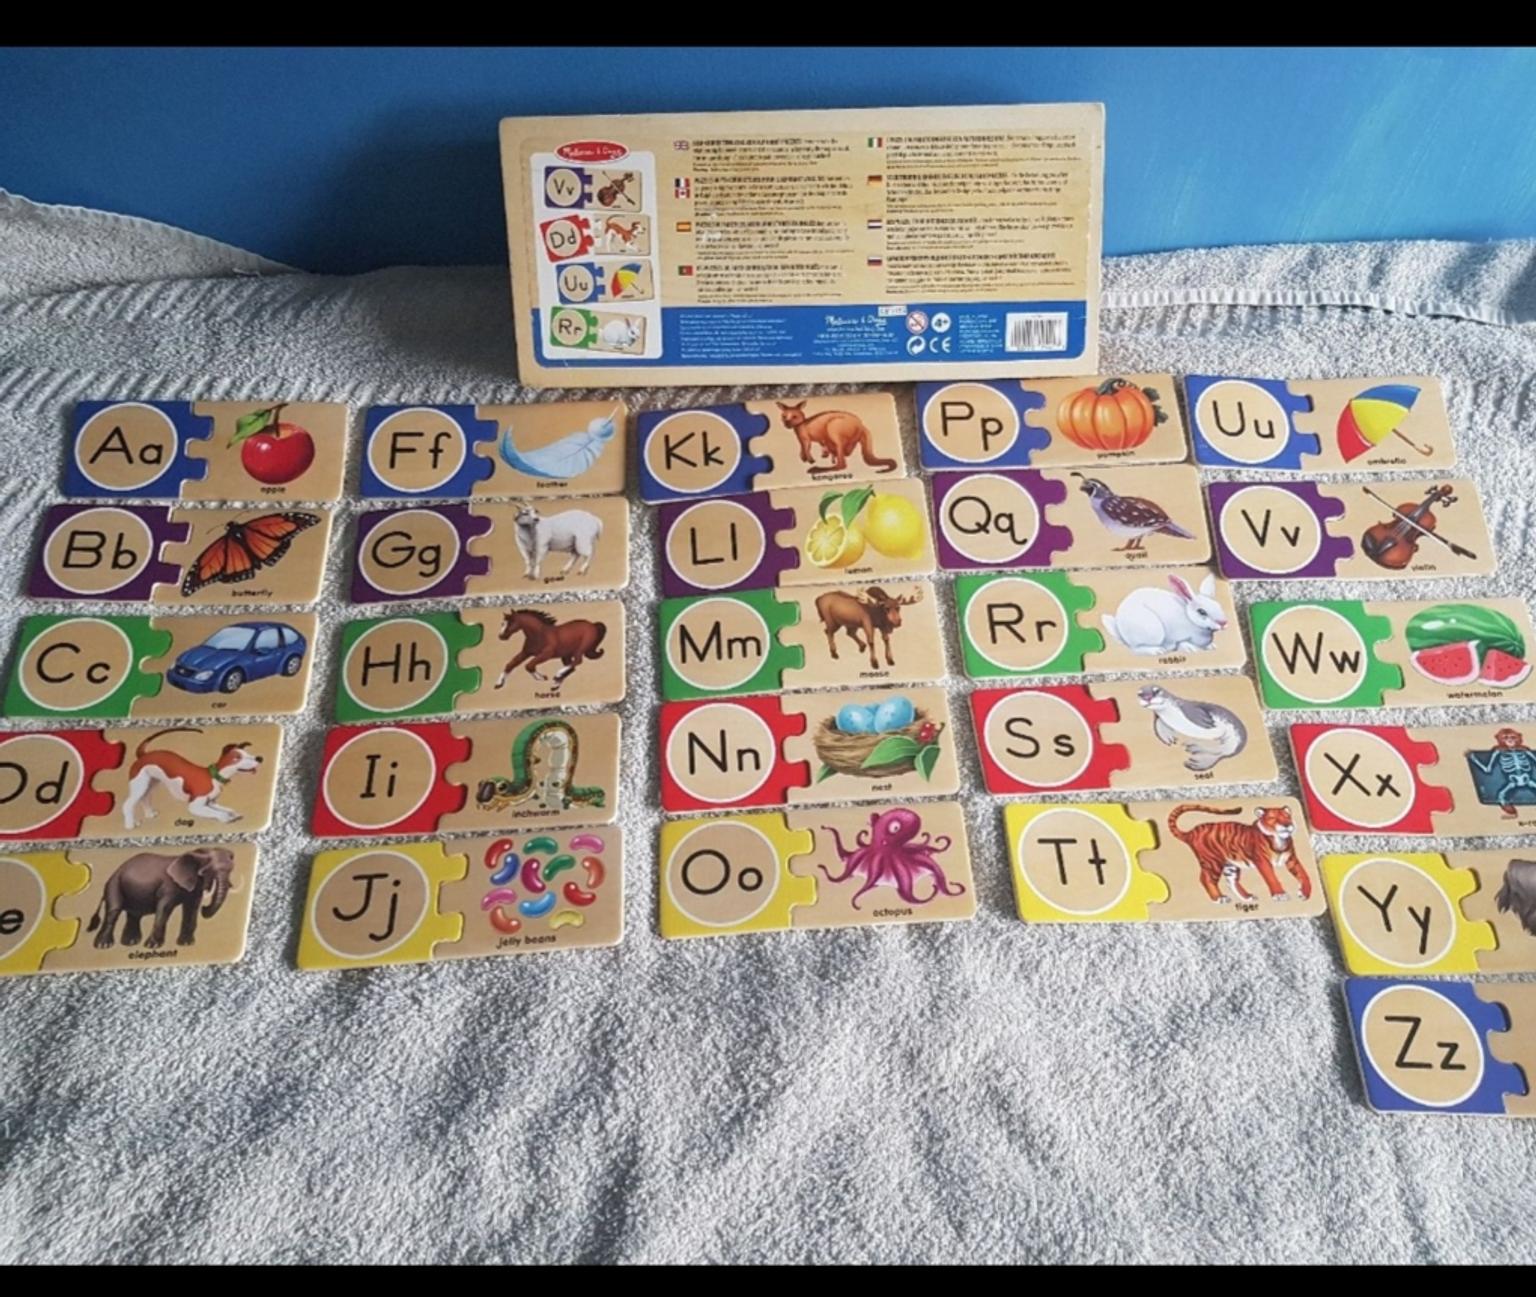 Melissa & Doug wooden alphabet puzzle in GU2 Guildford for £4.00 for